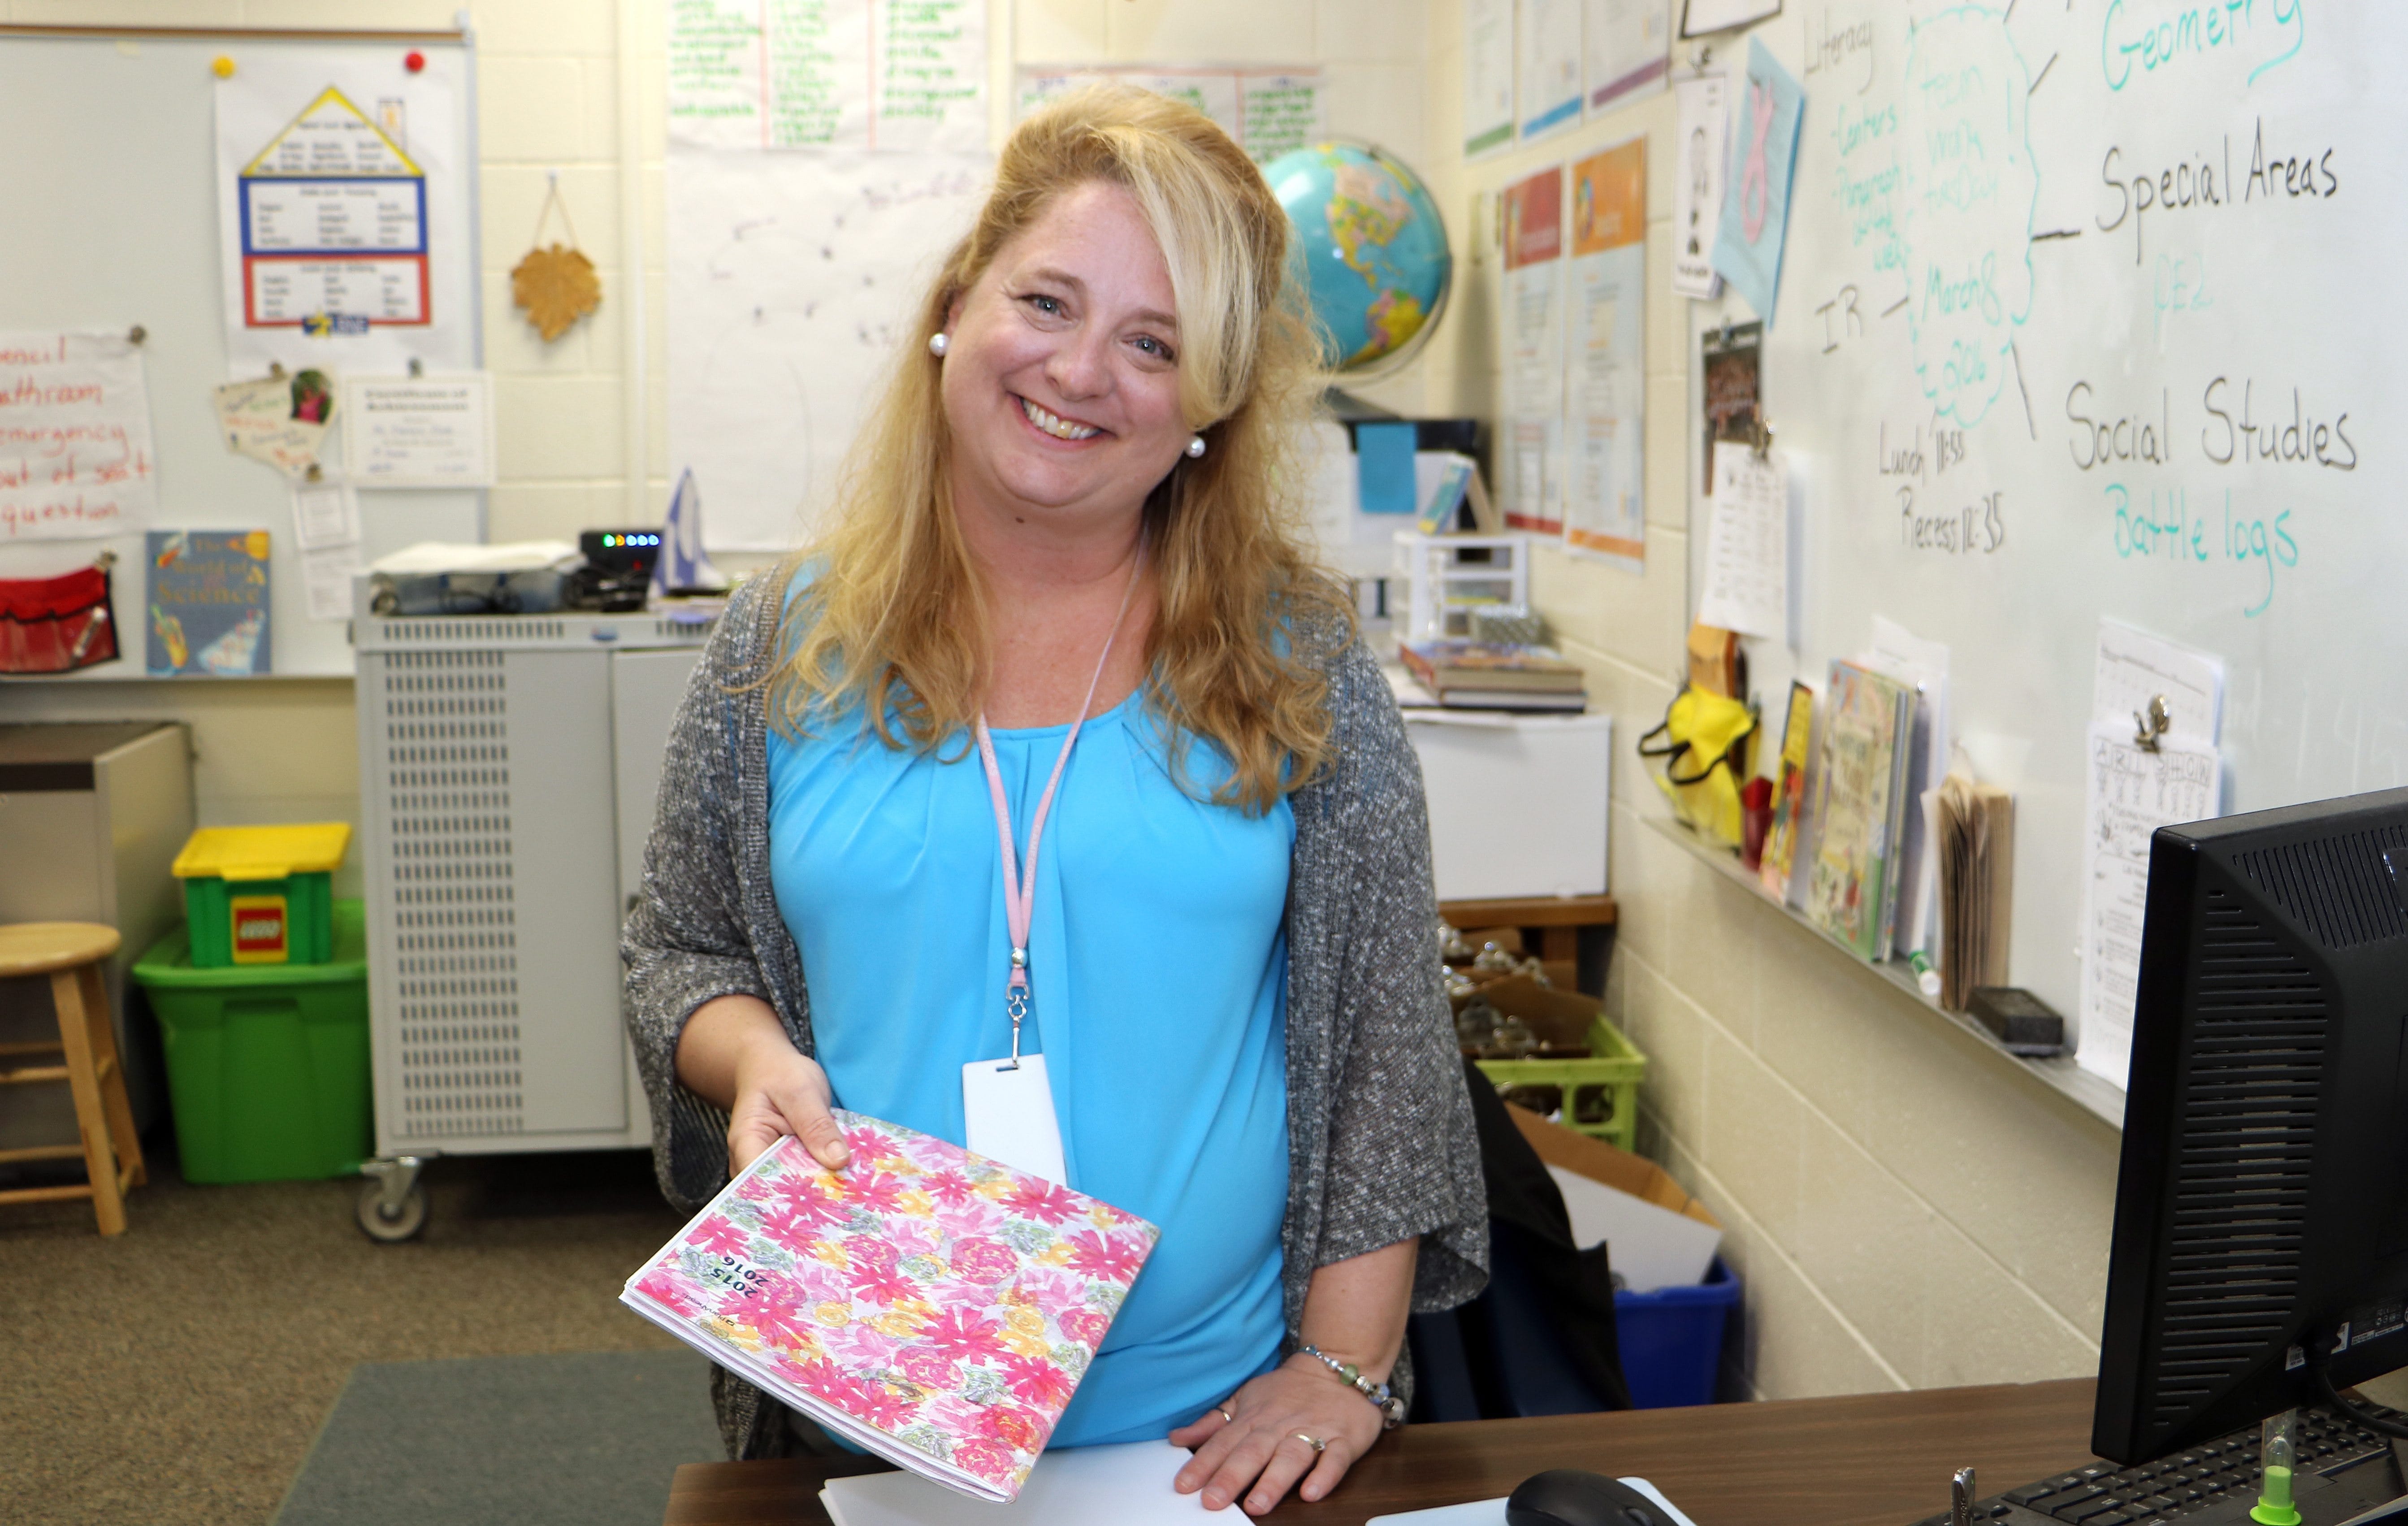 In this March 8 2016 photo, fourth-grade teacher Lori Clarke prepares for her students at Lonnie B. Nelson Elementary in Richland School District 2 in suburban Columbia, S.C. South Carolina's Career Changers loan-forgiveness program nearly covered the cost of Clarke's master's degree in education from the University of South Carolina. After graduating, $45,000 worth of loans were erased over three years of teaching at a high-poverty school in the Columbia area. She now works in a nearby school district. (AP Photo/Seanna M.